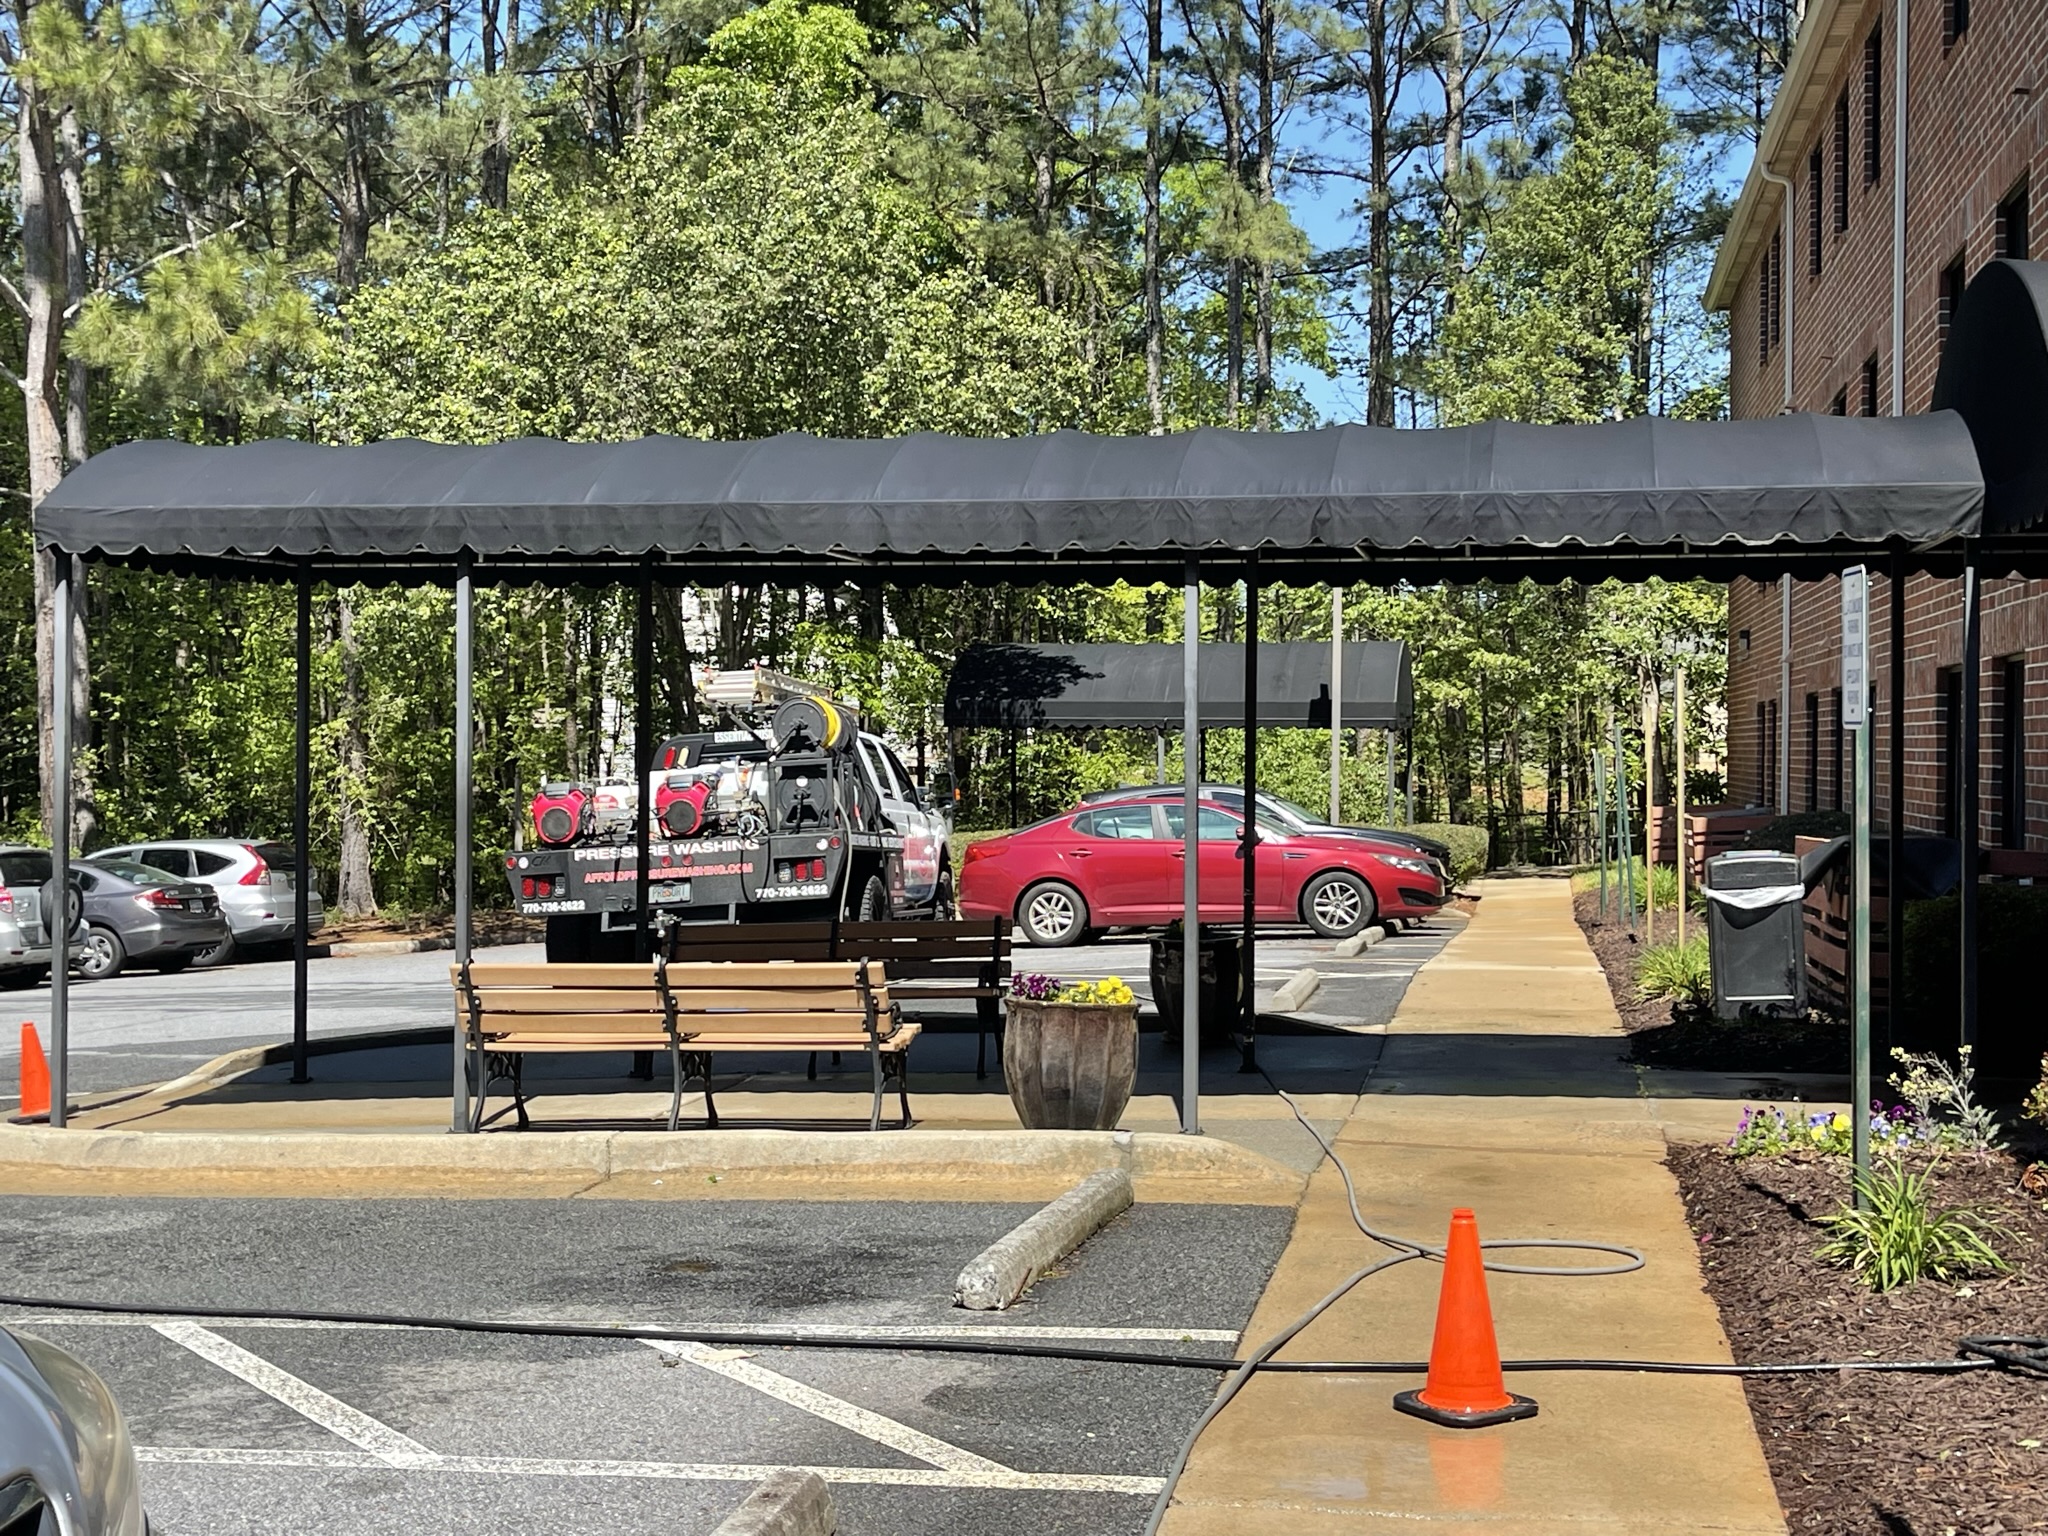 Thorough Awning Cleaning and Sidewalk Cleaning in Lilburn, GA